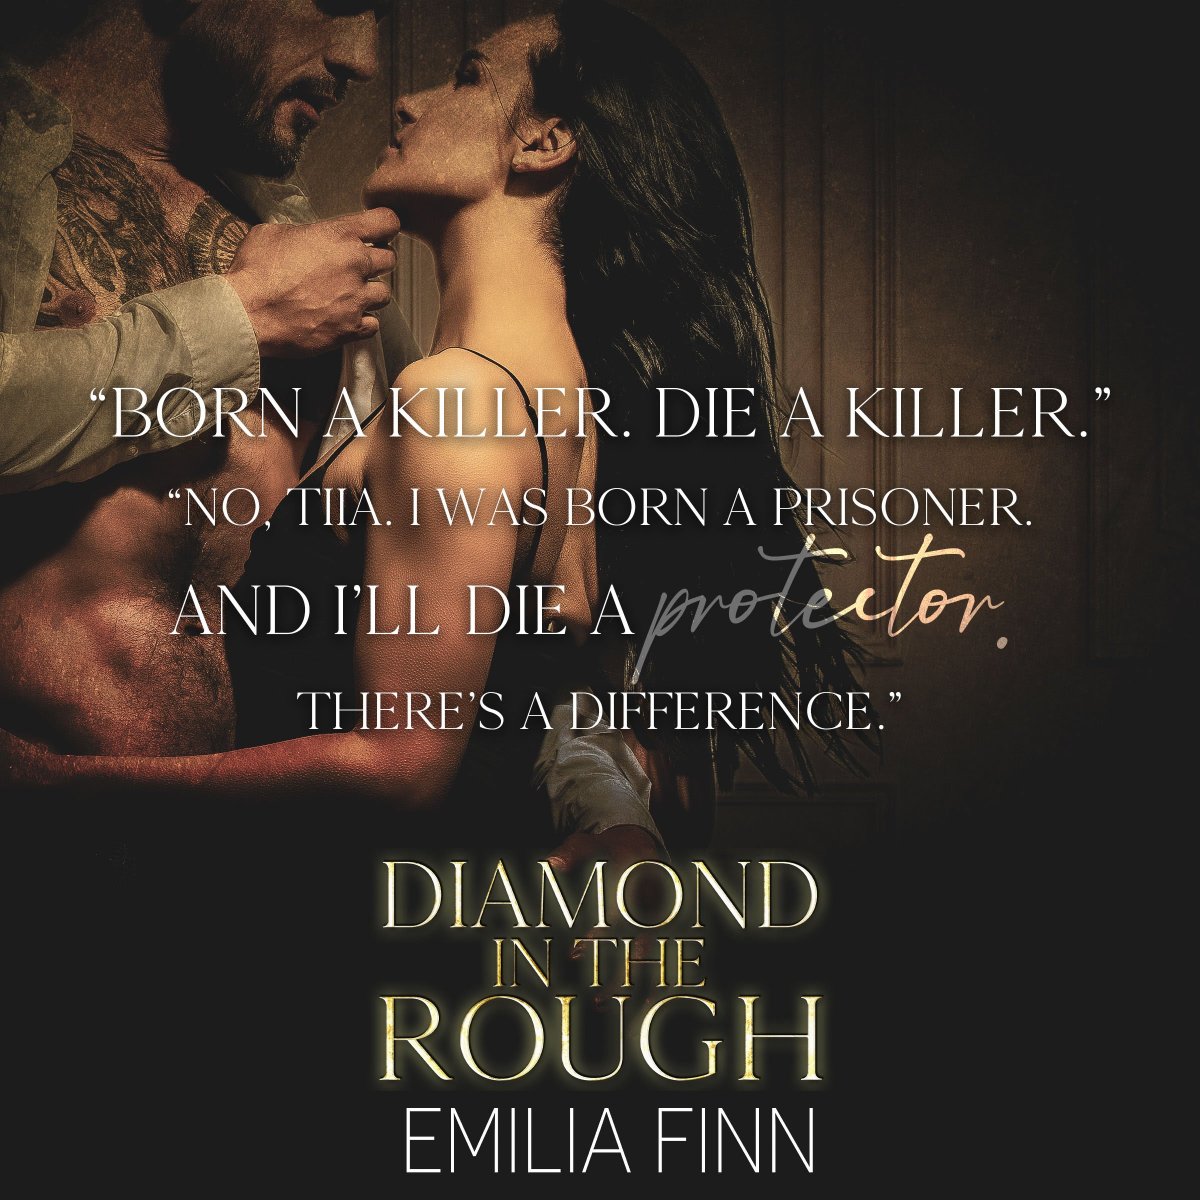 It's #TeaserTime for Diamond in the Rough by Emilia Finn! Dropping to your nearest Kindle 5/10!

#Preorder: geni.us/dinrevents

#MafiaRomance #AlphaholeHero #Angsty #BadBoy #AntiHero #BroodyHero @Chaotic_Creativ